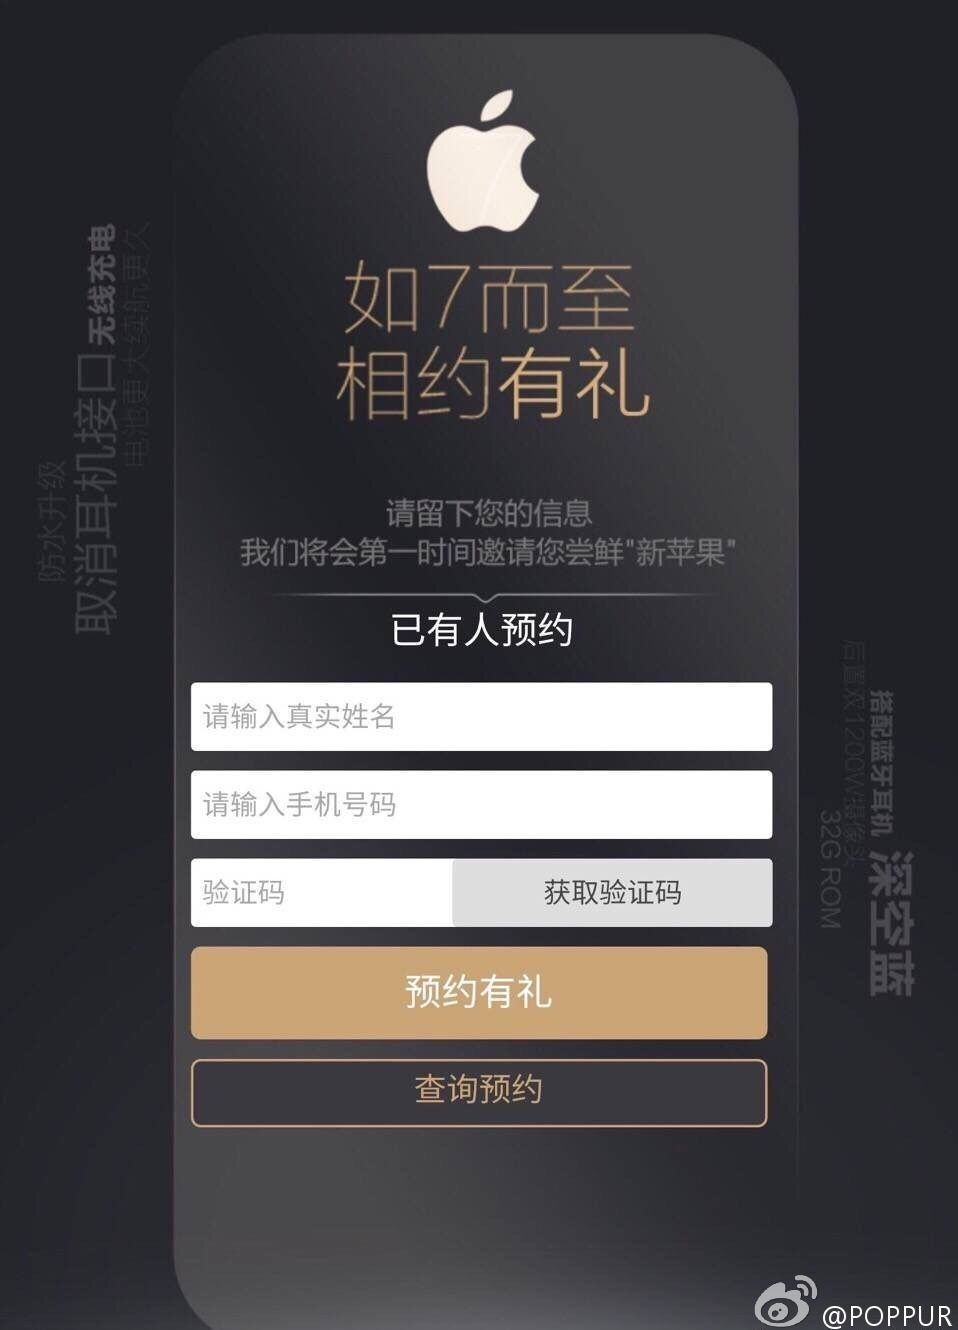 Picture allegedly shows China Mobile's registration page for the Apple iPhone 7 Plus - China Mobile's registration page for the Apple iPhone 7 Plus makes an early appearance?